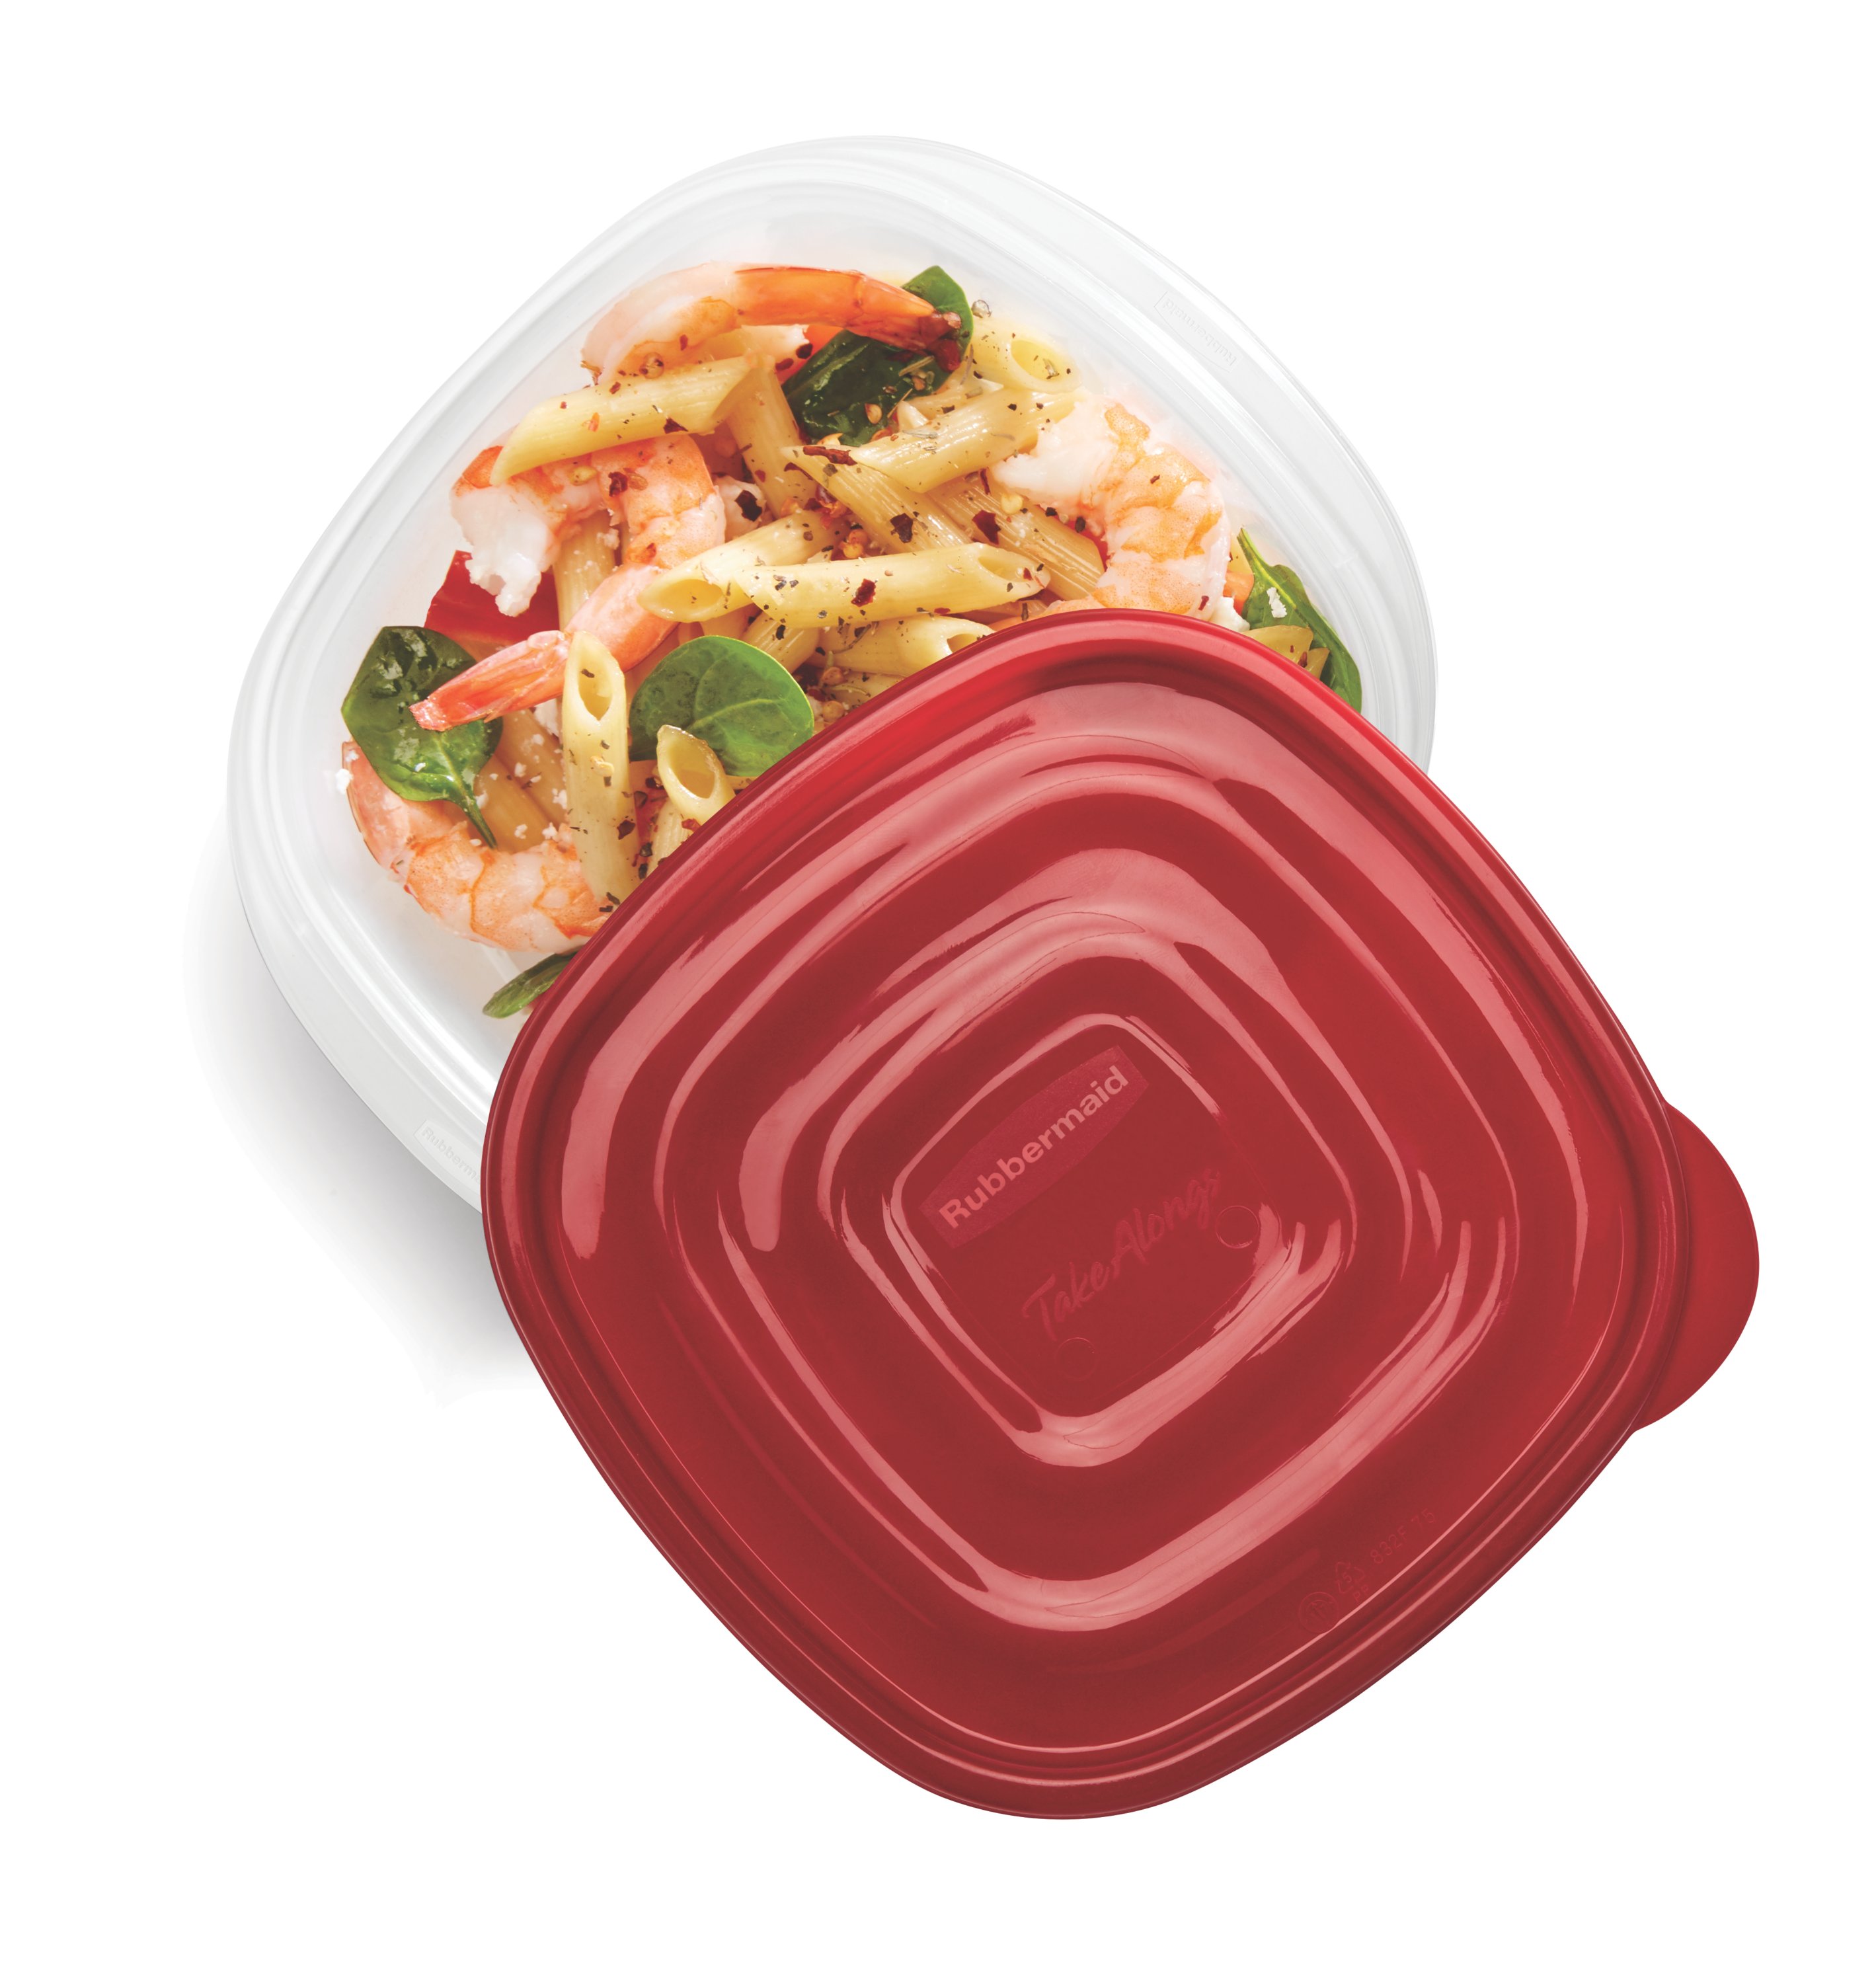 Buy Rubbermaid TakeAlongs Food Storage Container 5.2 Cup